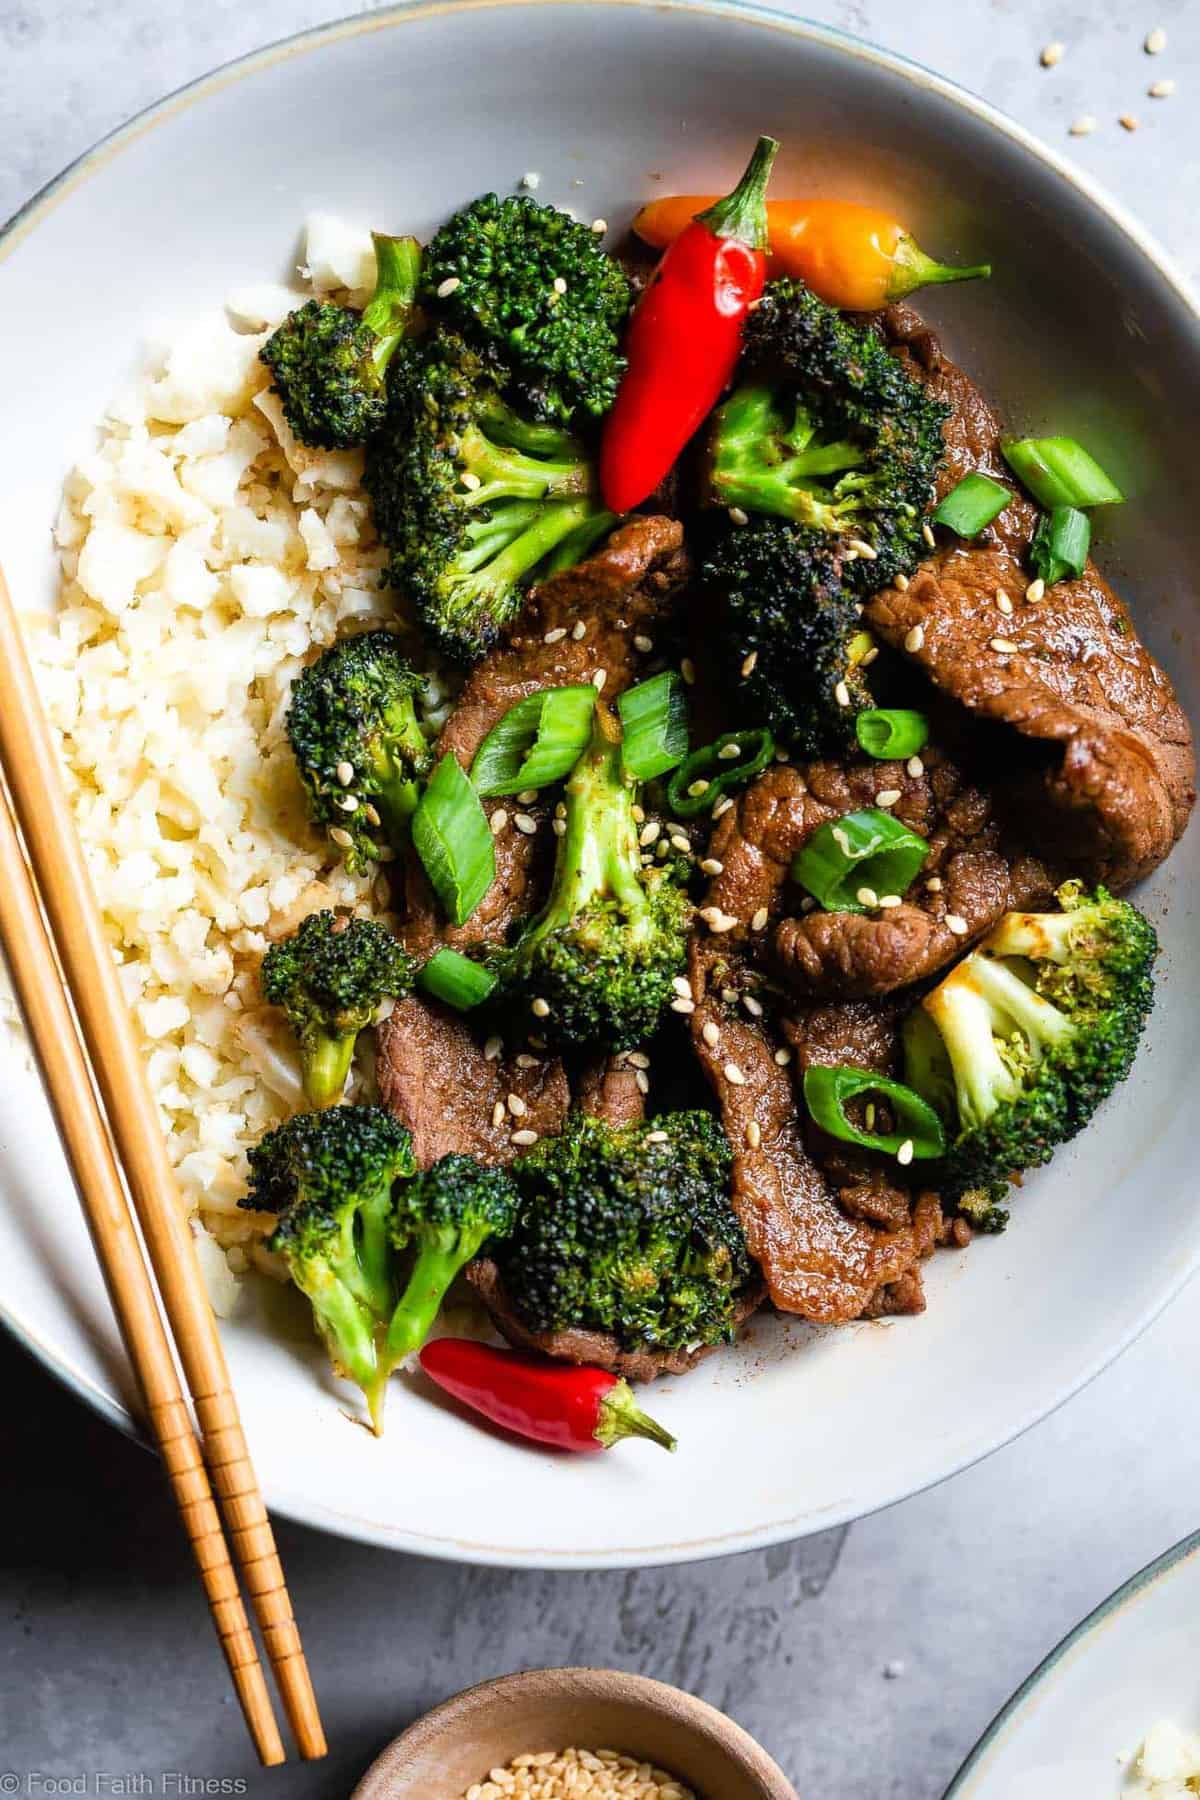 Easy Whole30 Low Carb Beef and Broccoli - This keto beef and broccoli is an EASY, one-pot weeknight meal that even picky eaters will love! So much yummier and healthier than takeout too! | #Foodfaithfitness | #Glutenfree #Keto #Paleo #Lowcarb #Whole30